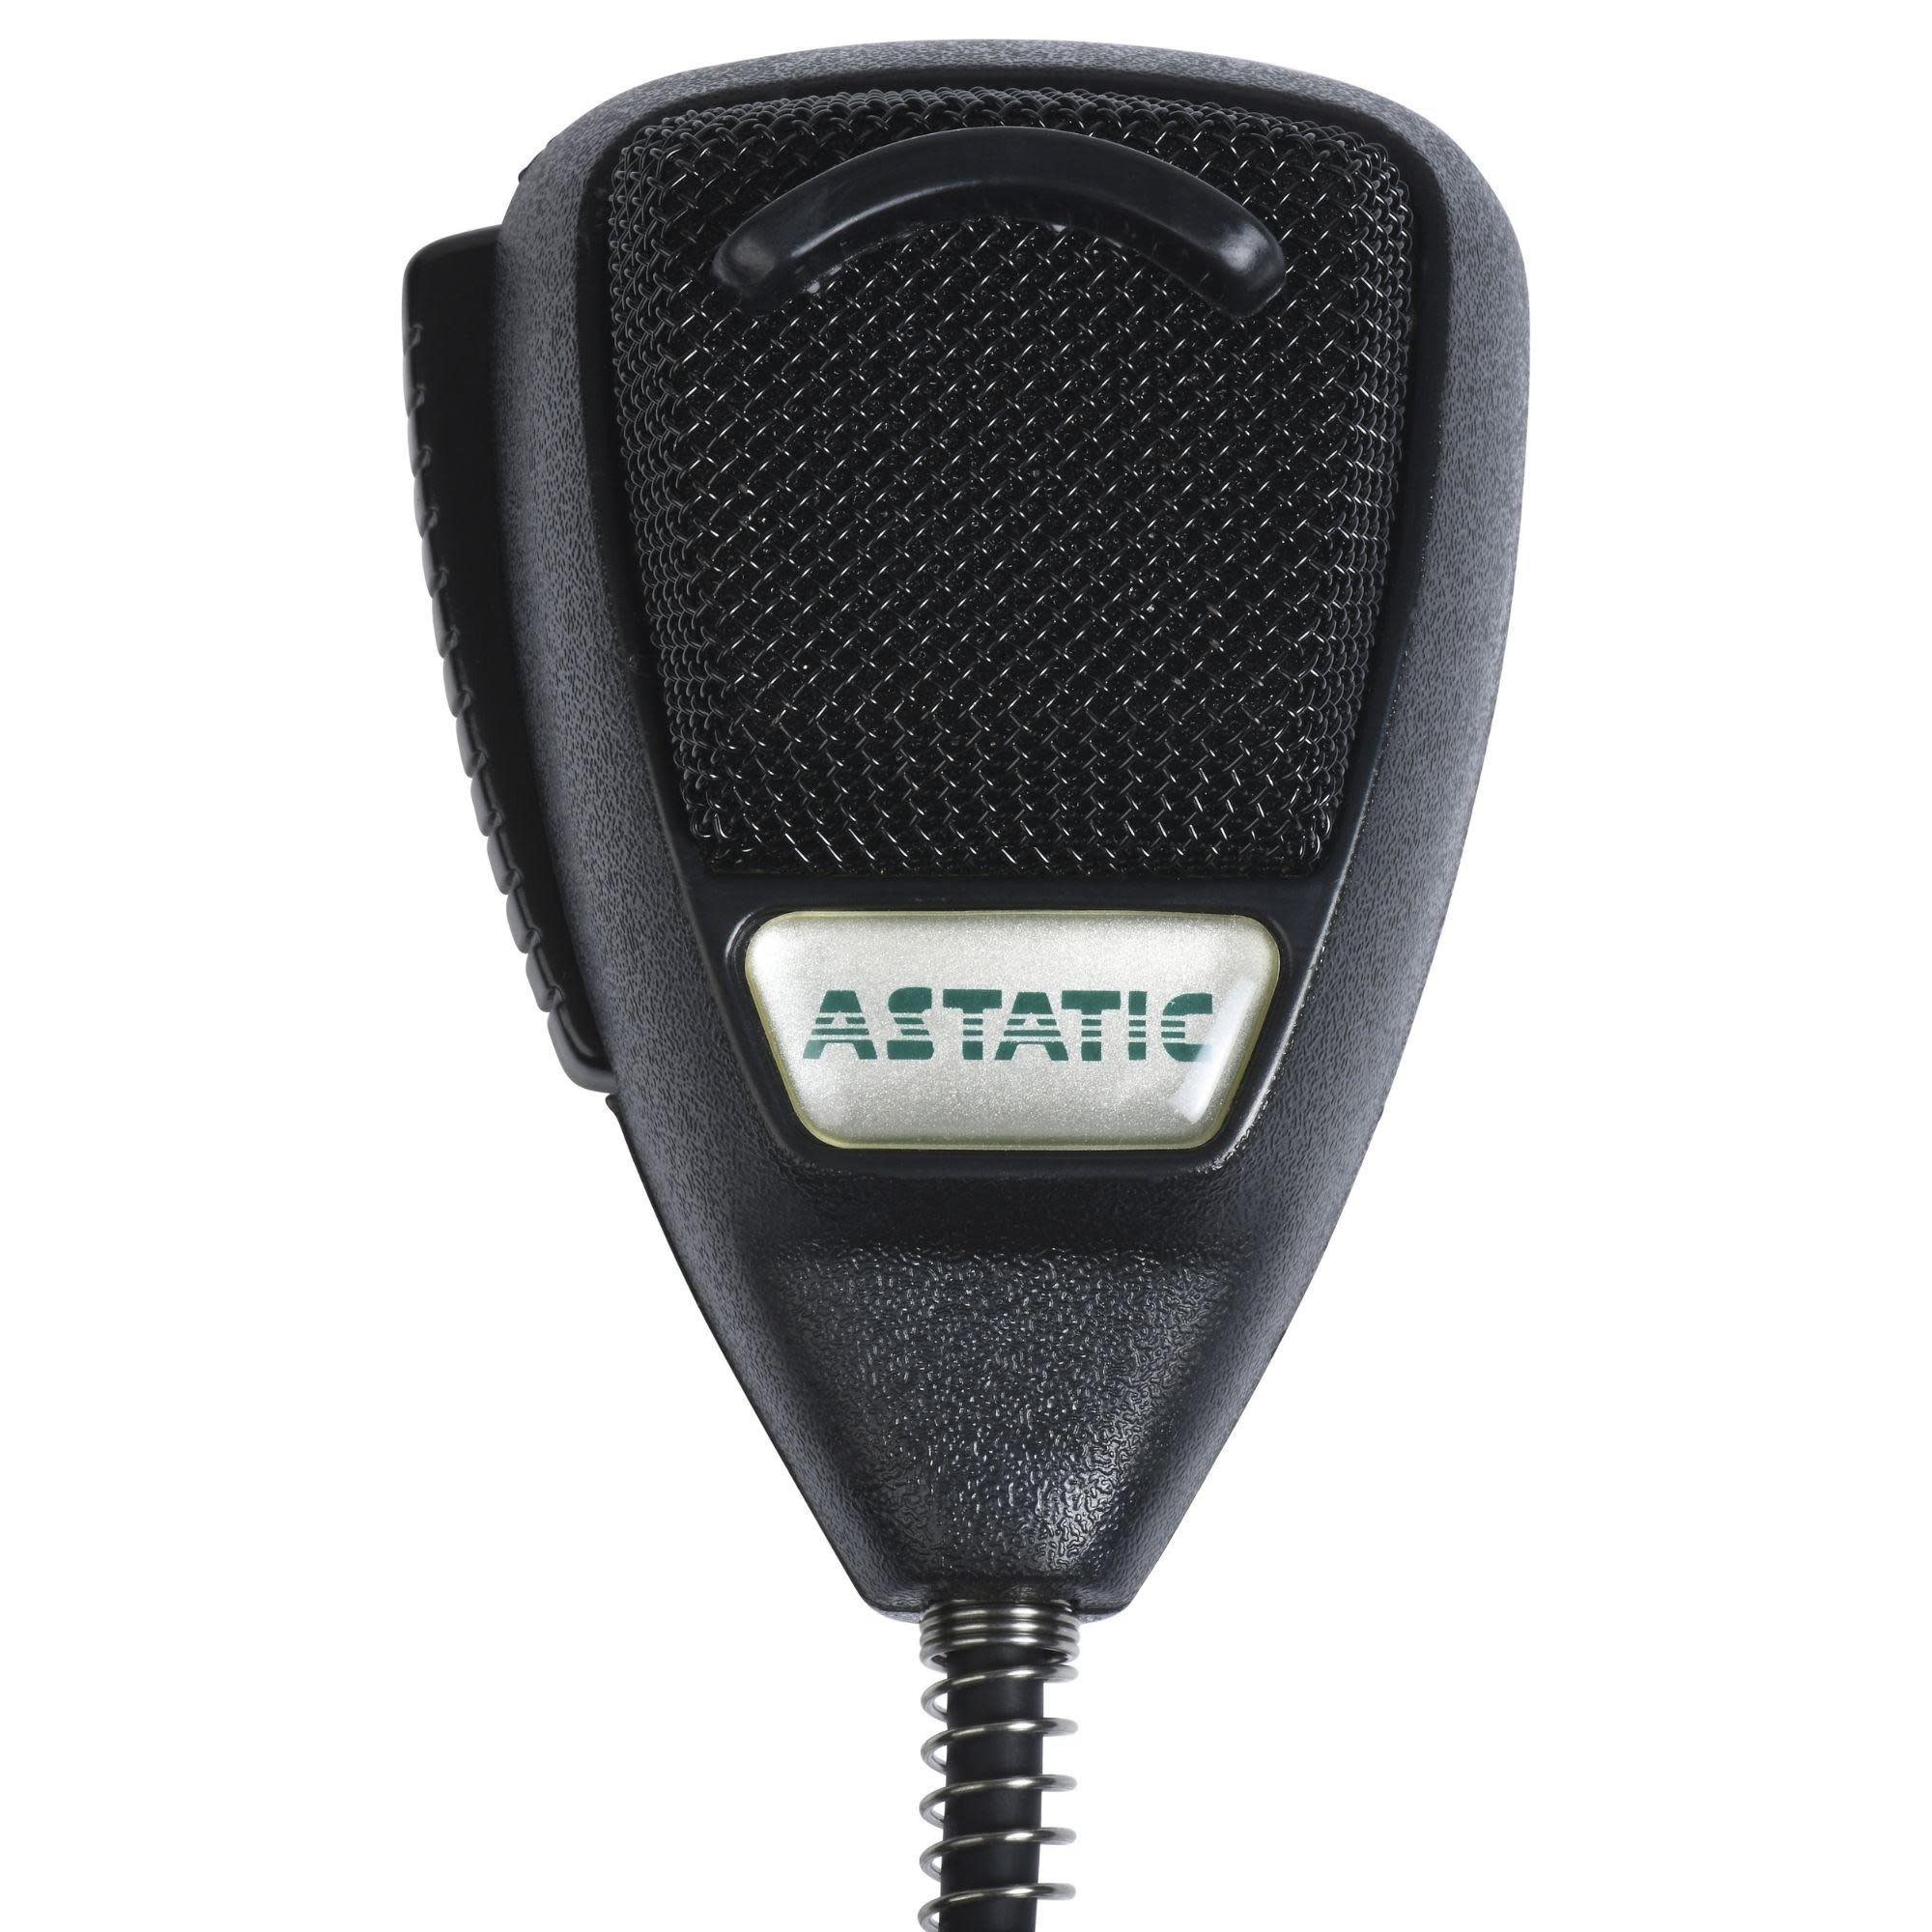 Astatic, Astatic 631L Noise-Cancelling Palmheld Dynamic Microphone with Push to Talk